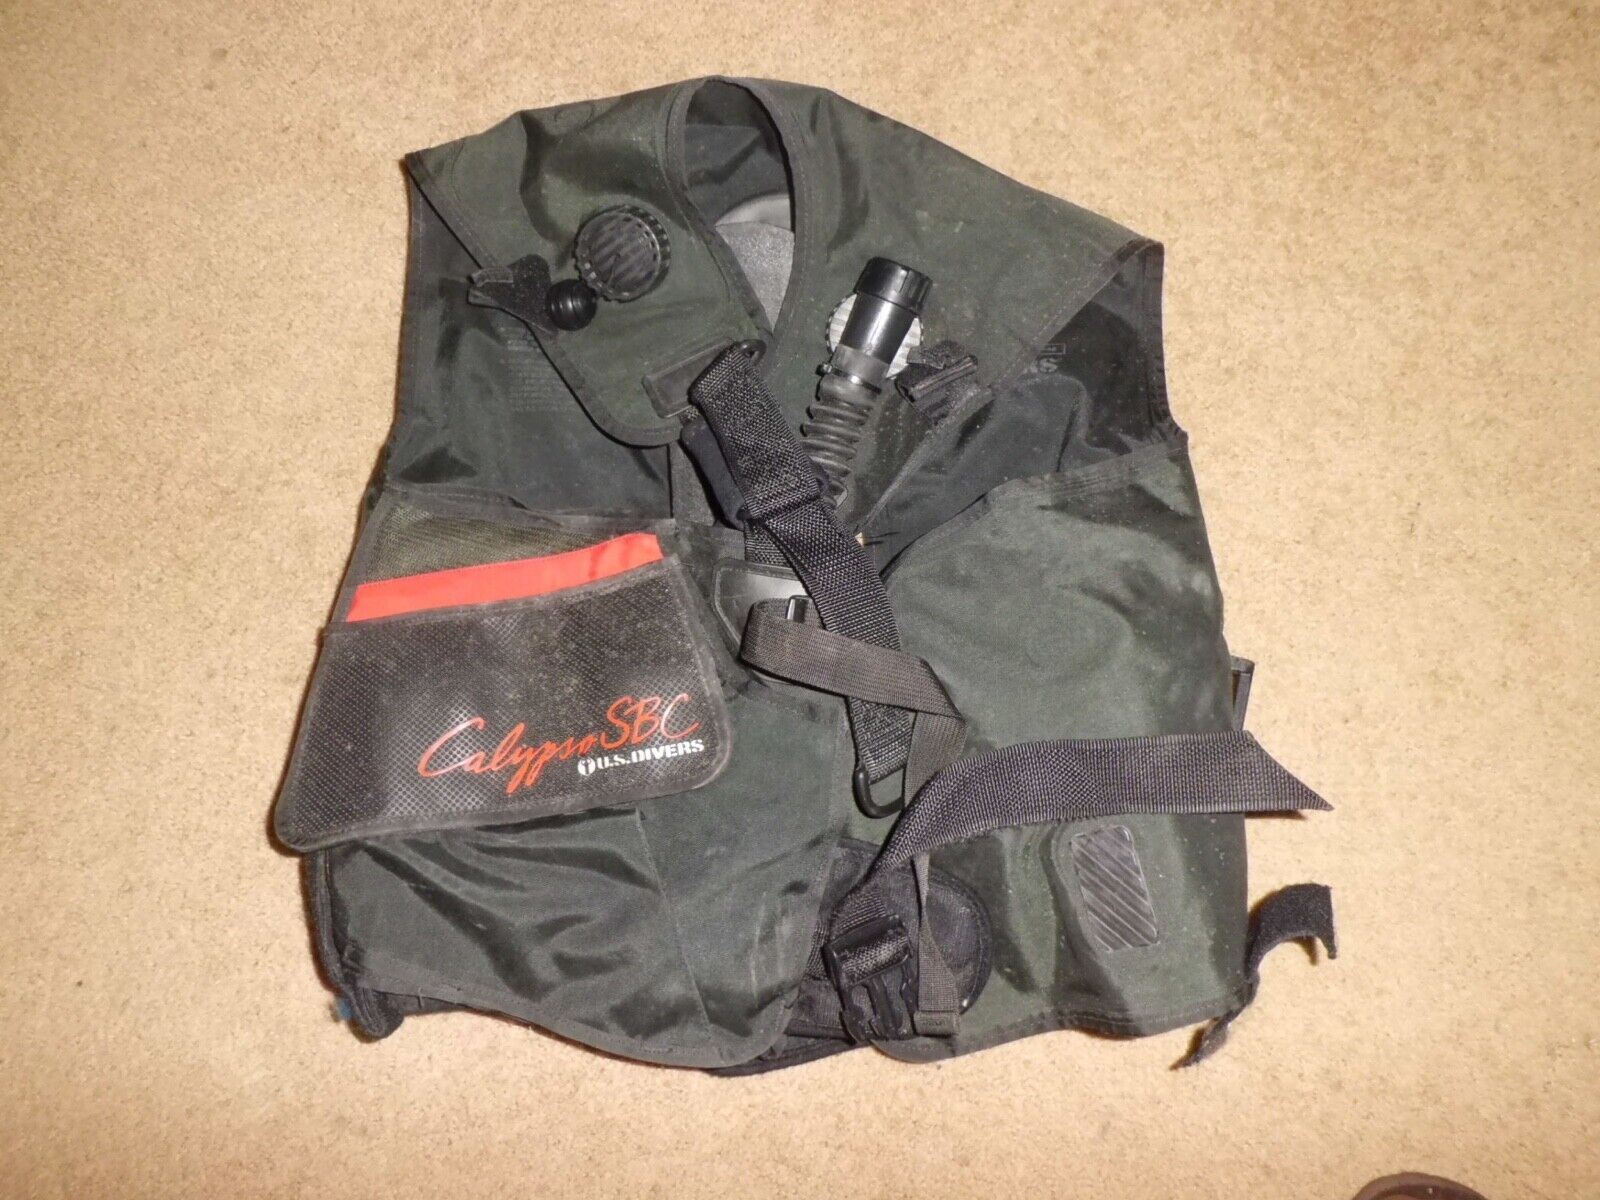 US Divers Limited price sale Calypso SBC Free shipping anywhere in the nation Large Vest Scuba Diving